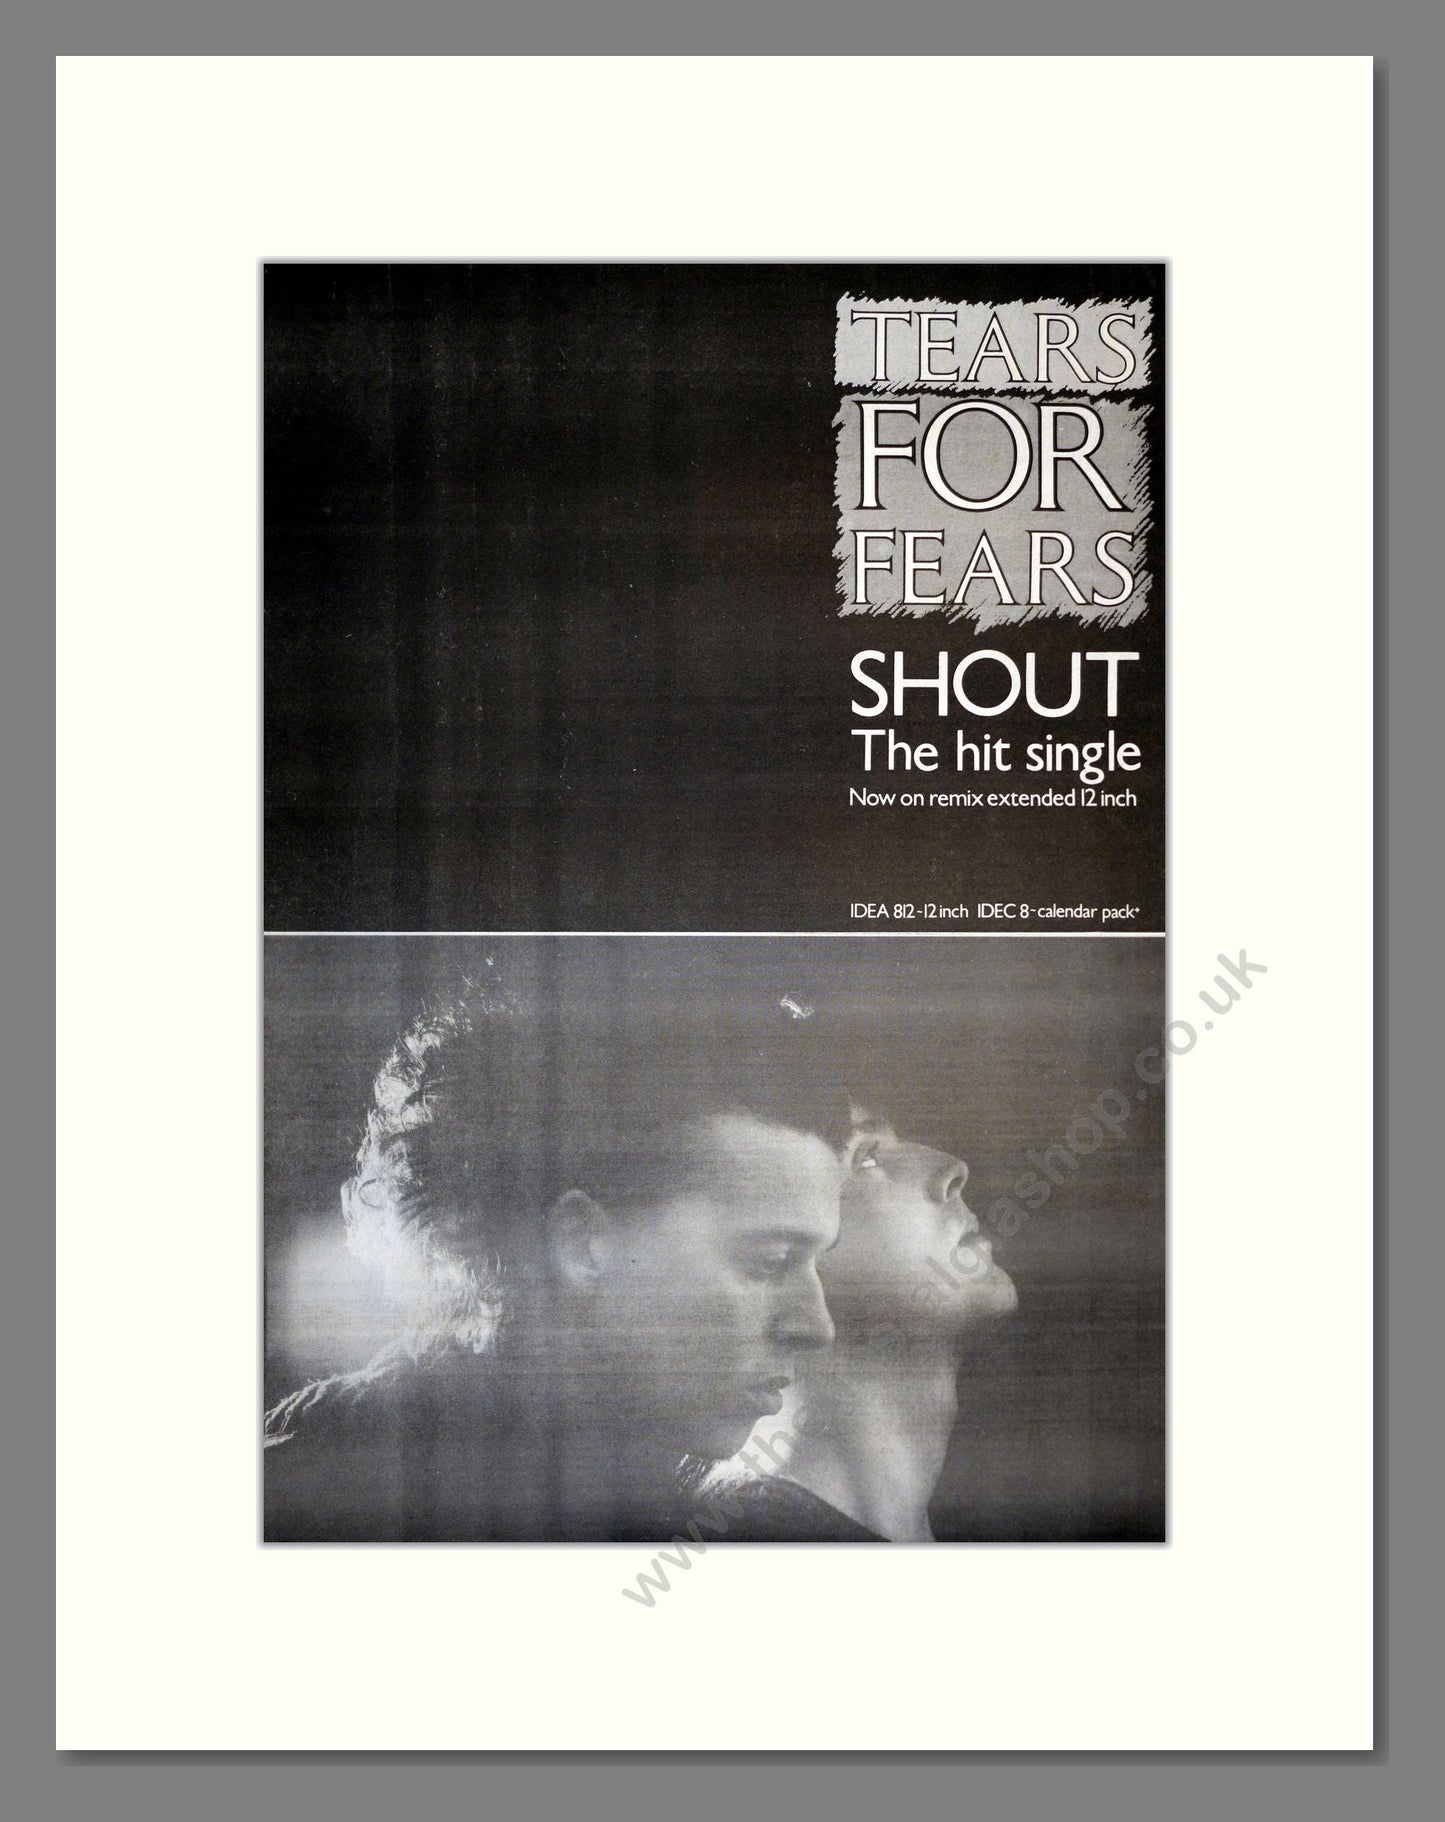 Tears For Fears - Shout. Vintage Advert 1984 (ref AD17267)